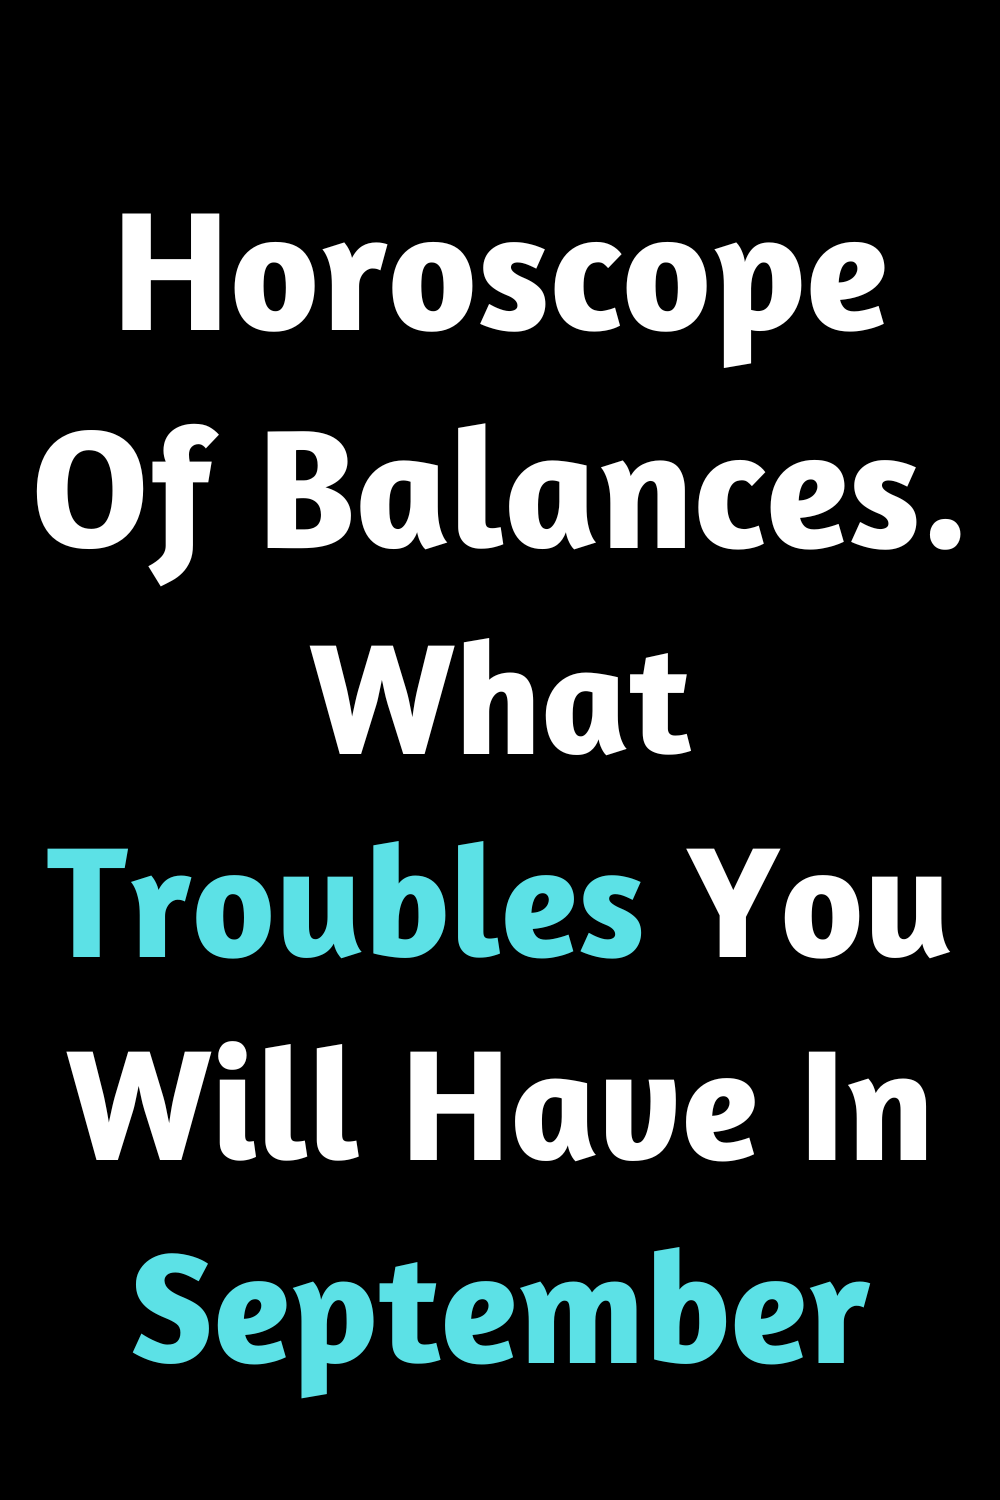 Horoscope Of Balances. What Troubles You Will Have In September